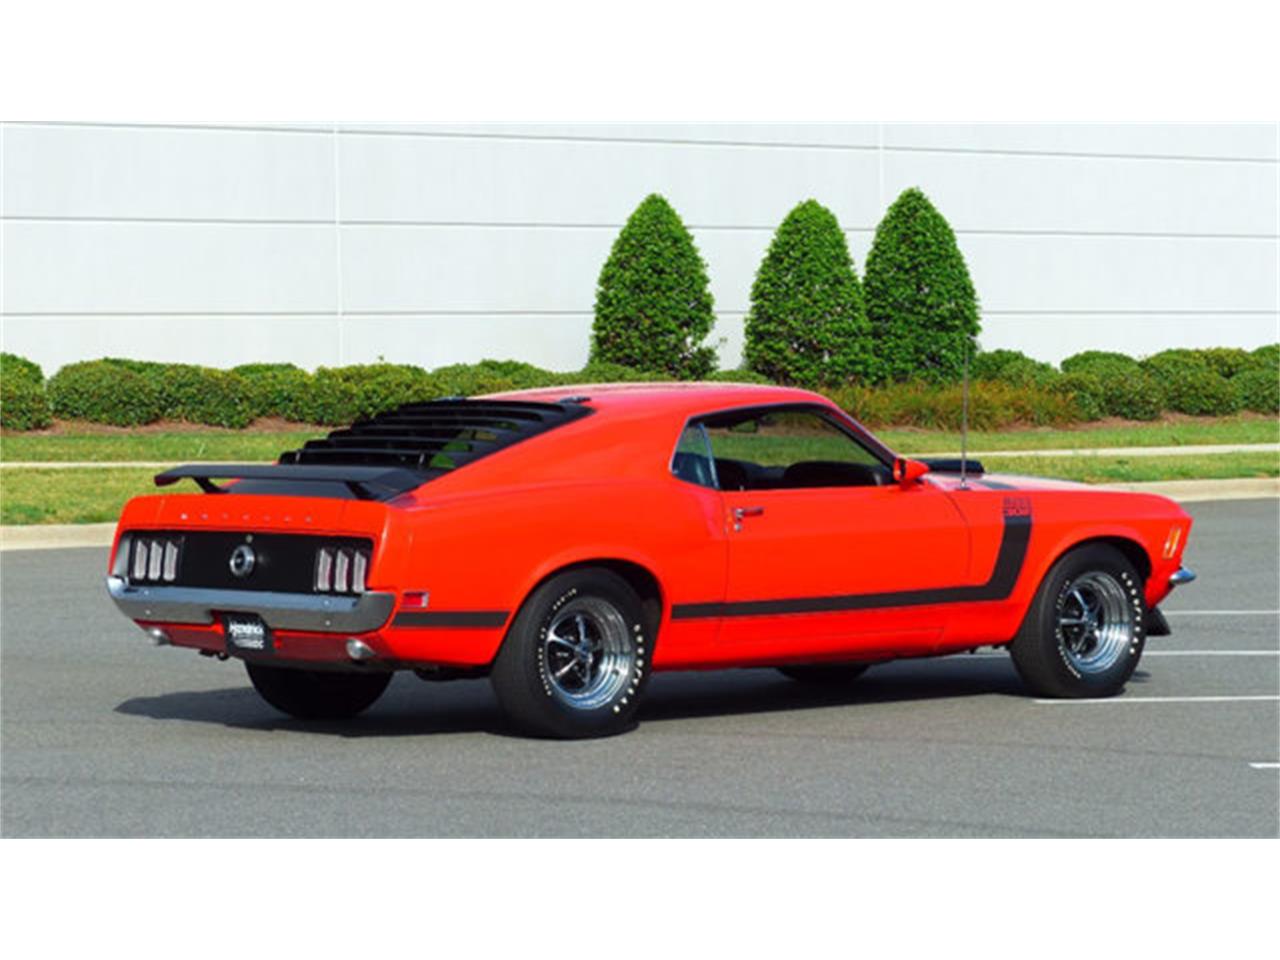 1970 Ford Boss 302 Mustang for Sale | ClassicCars.com | CC-892244